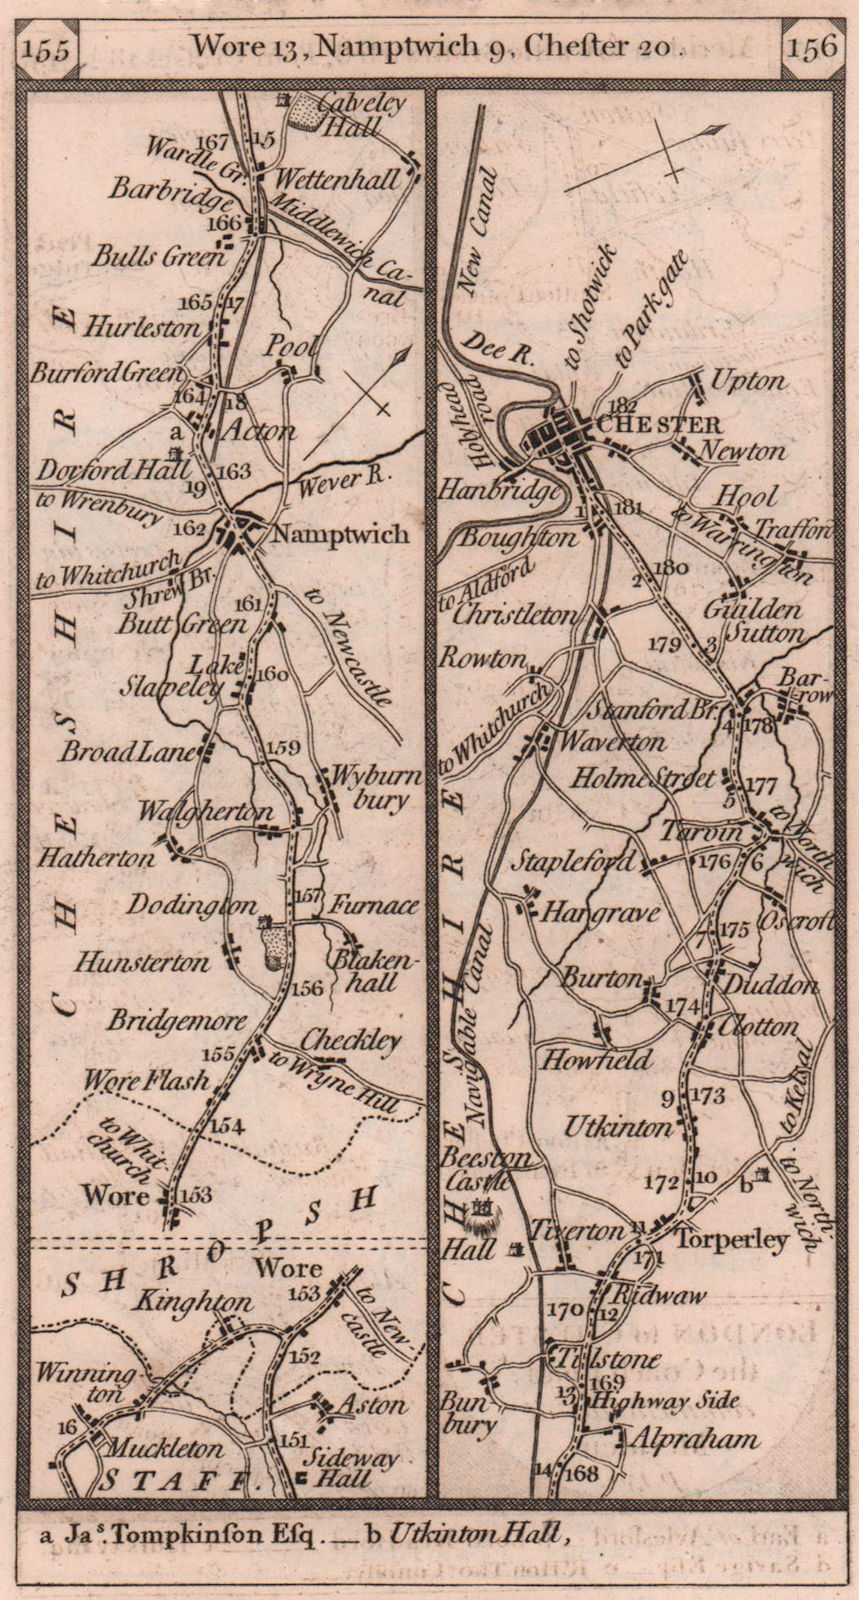 Associate Product Nantwich - Tarporley - Chester road strip map PATERSON 1803 old antique